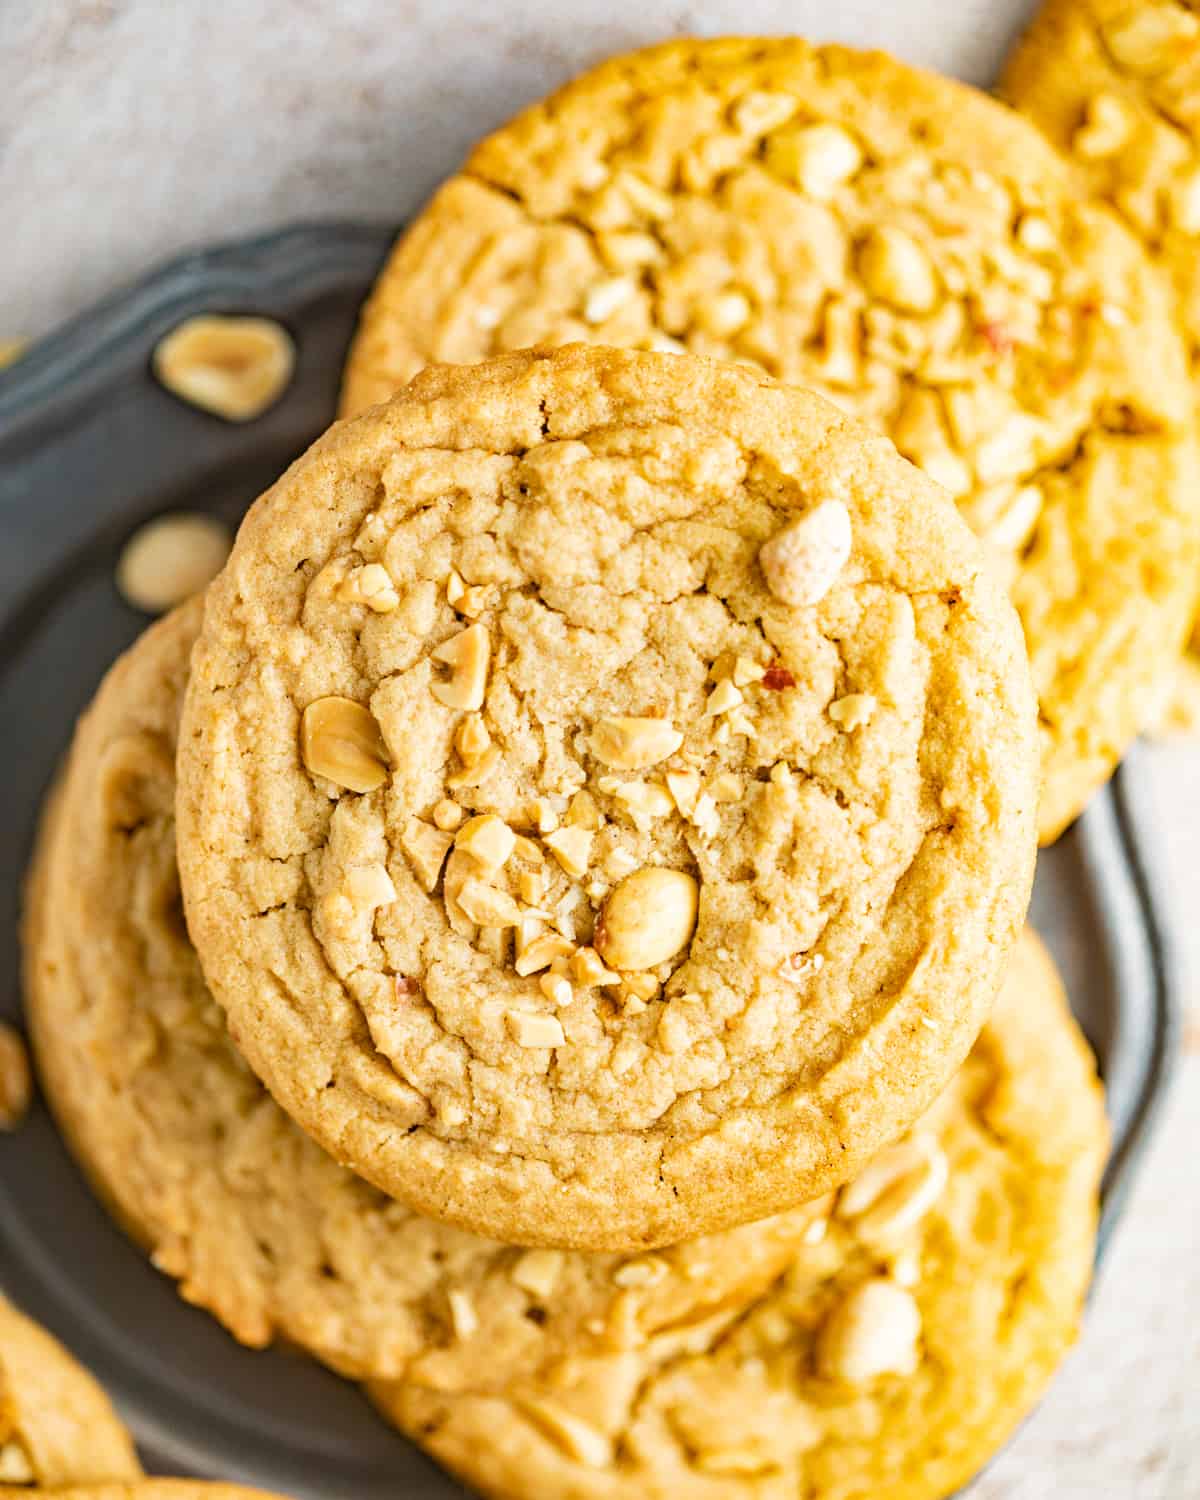 peanut butter cookies on a silver plate.